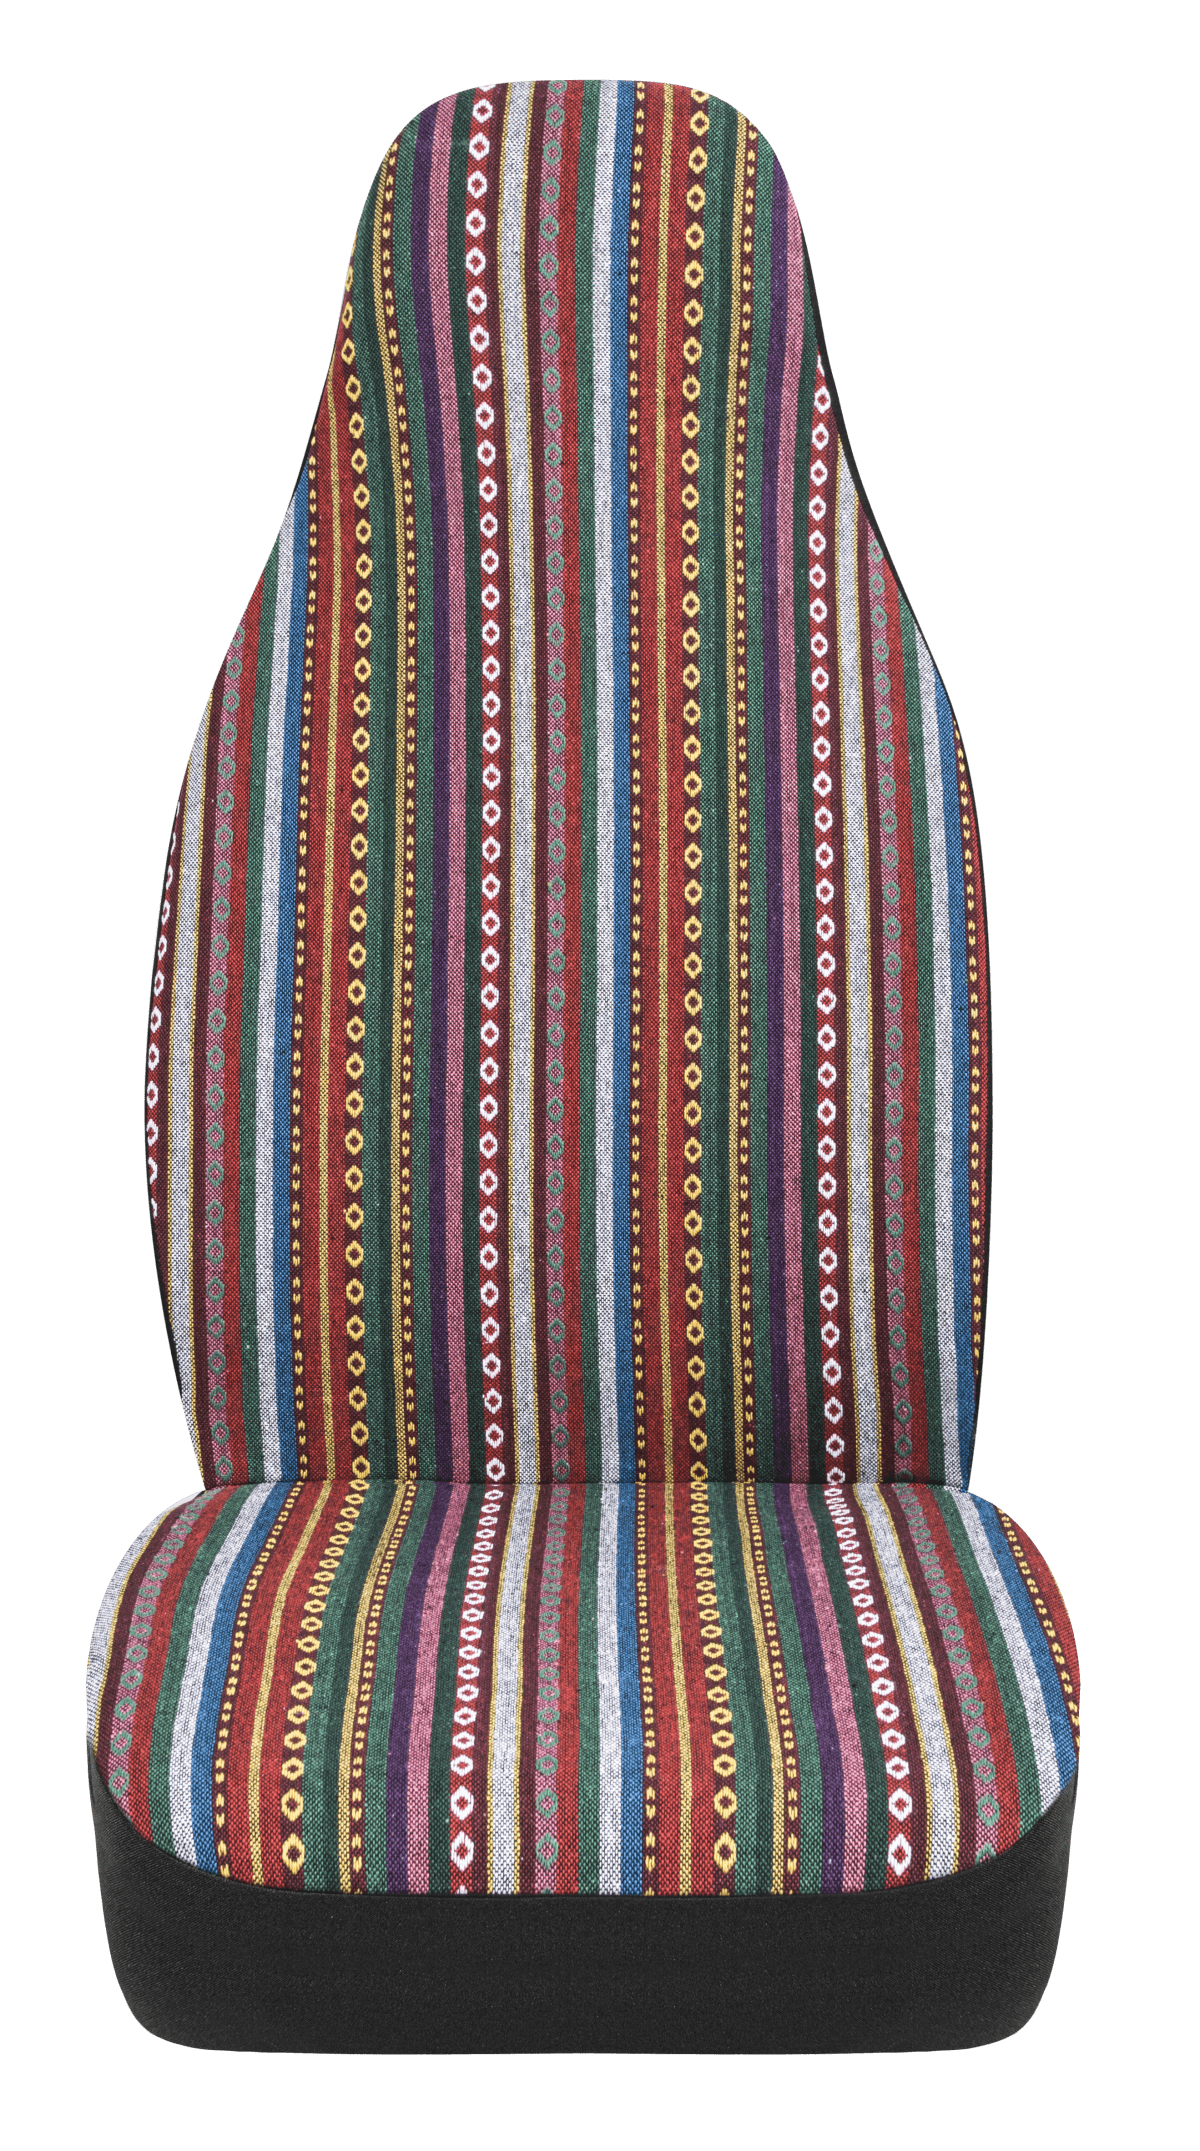 Auto Drive 2 Piece High Back Seat Covers Bohemian Dreams Polyester Colorful, Universal Fit, SC3116